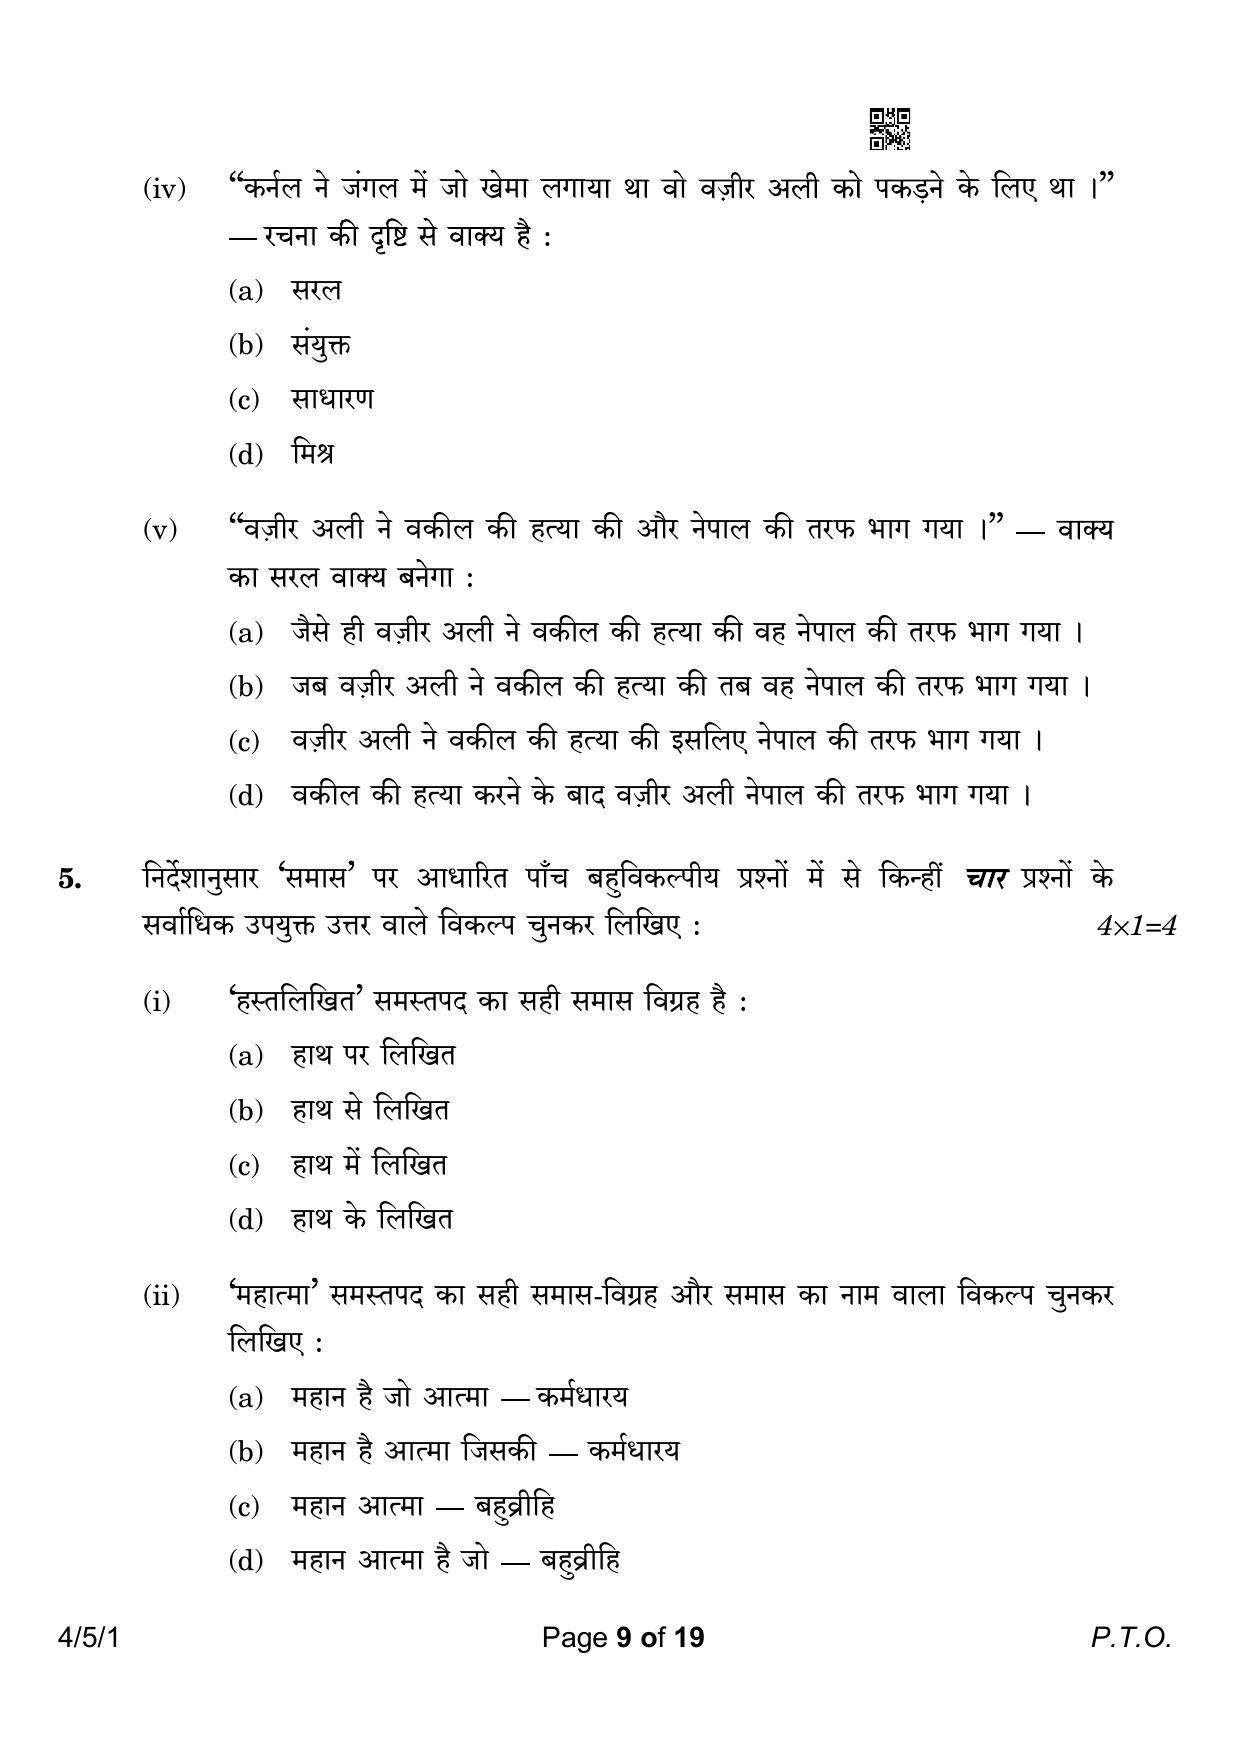 CBSE Class 10 4-5-1 Hindi B 2023 Question Paper - Page 9